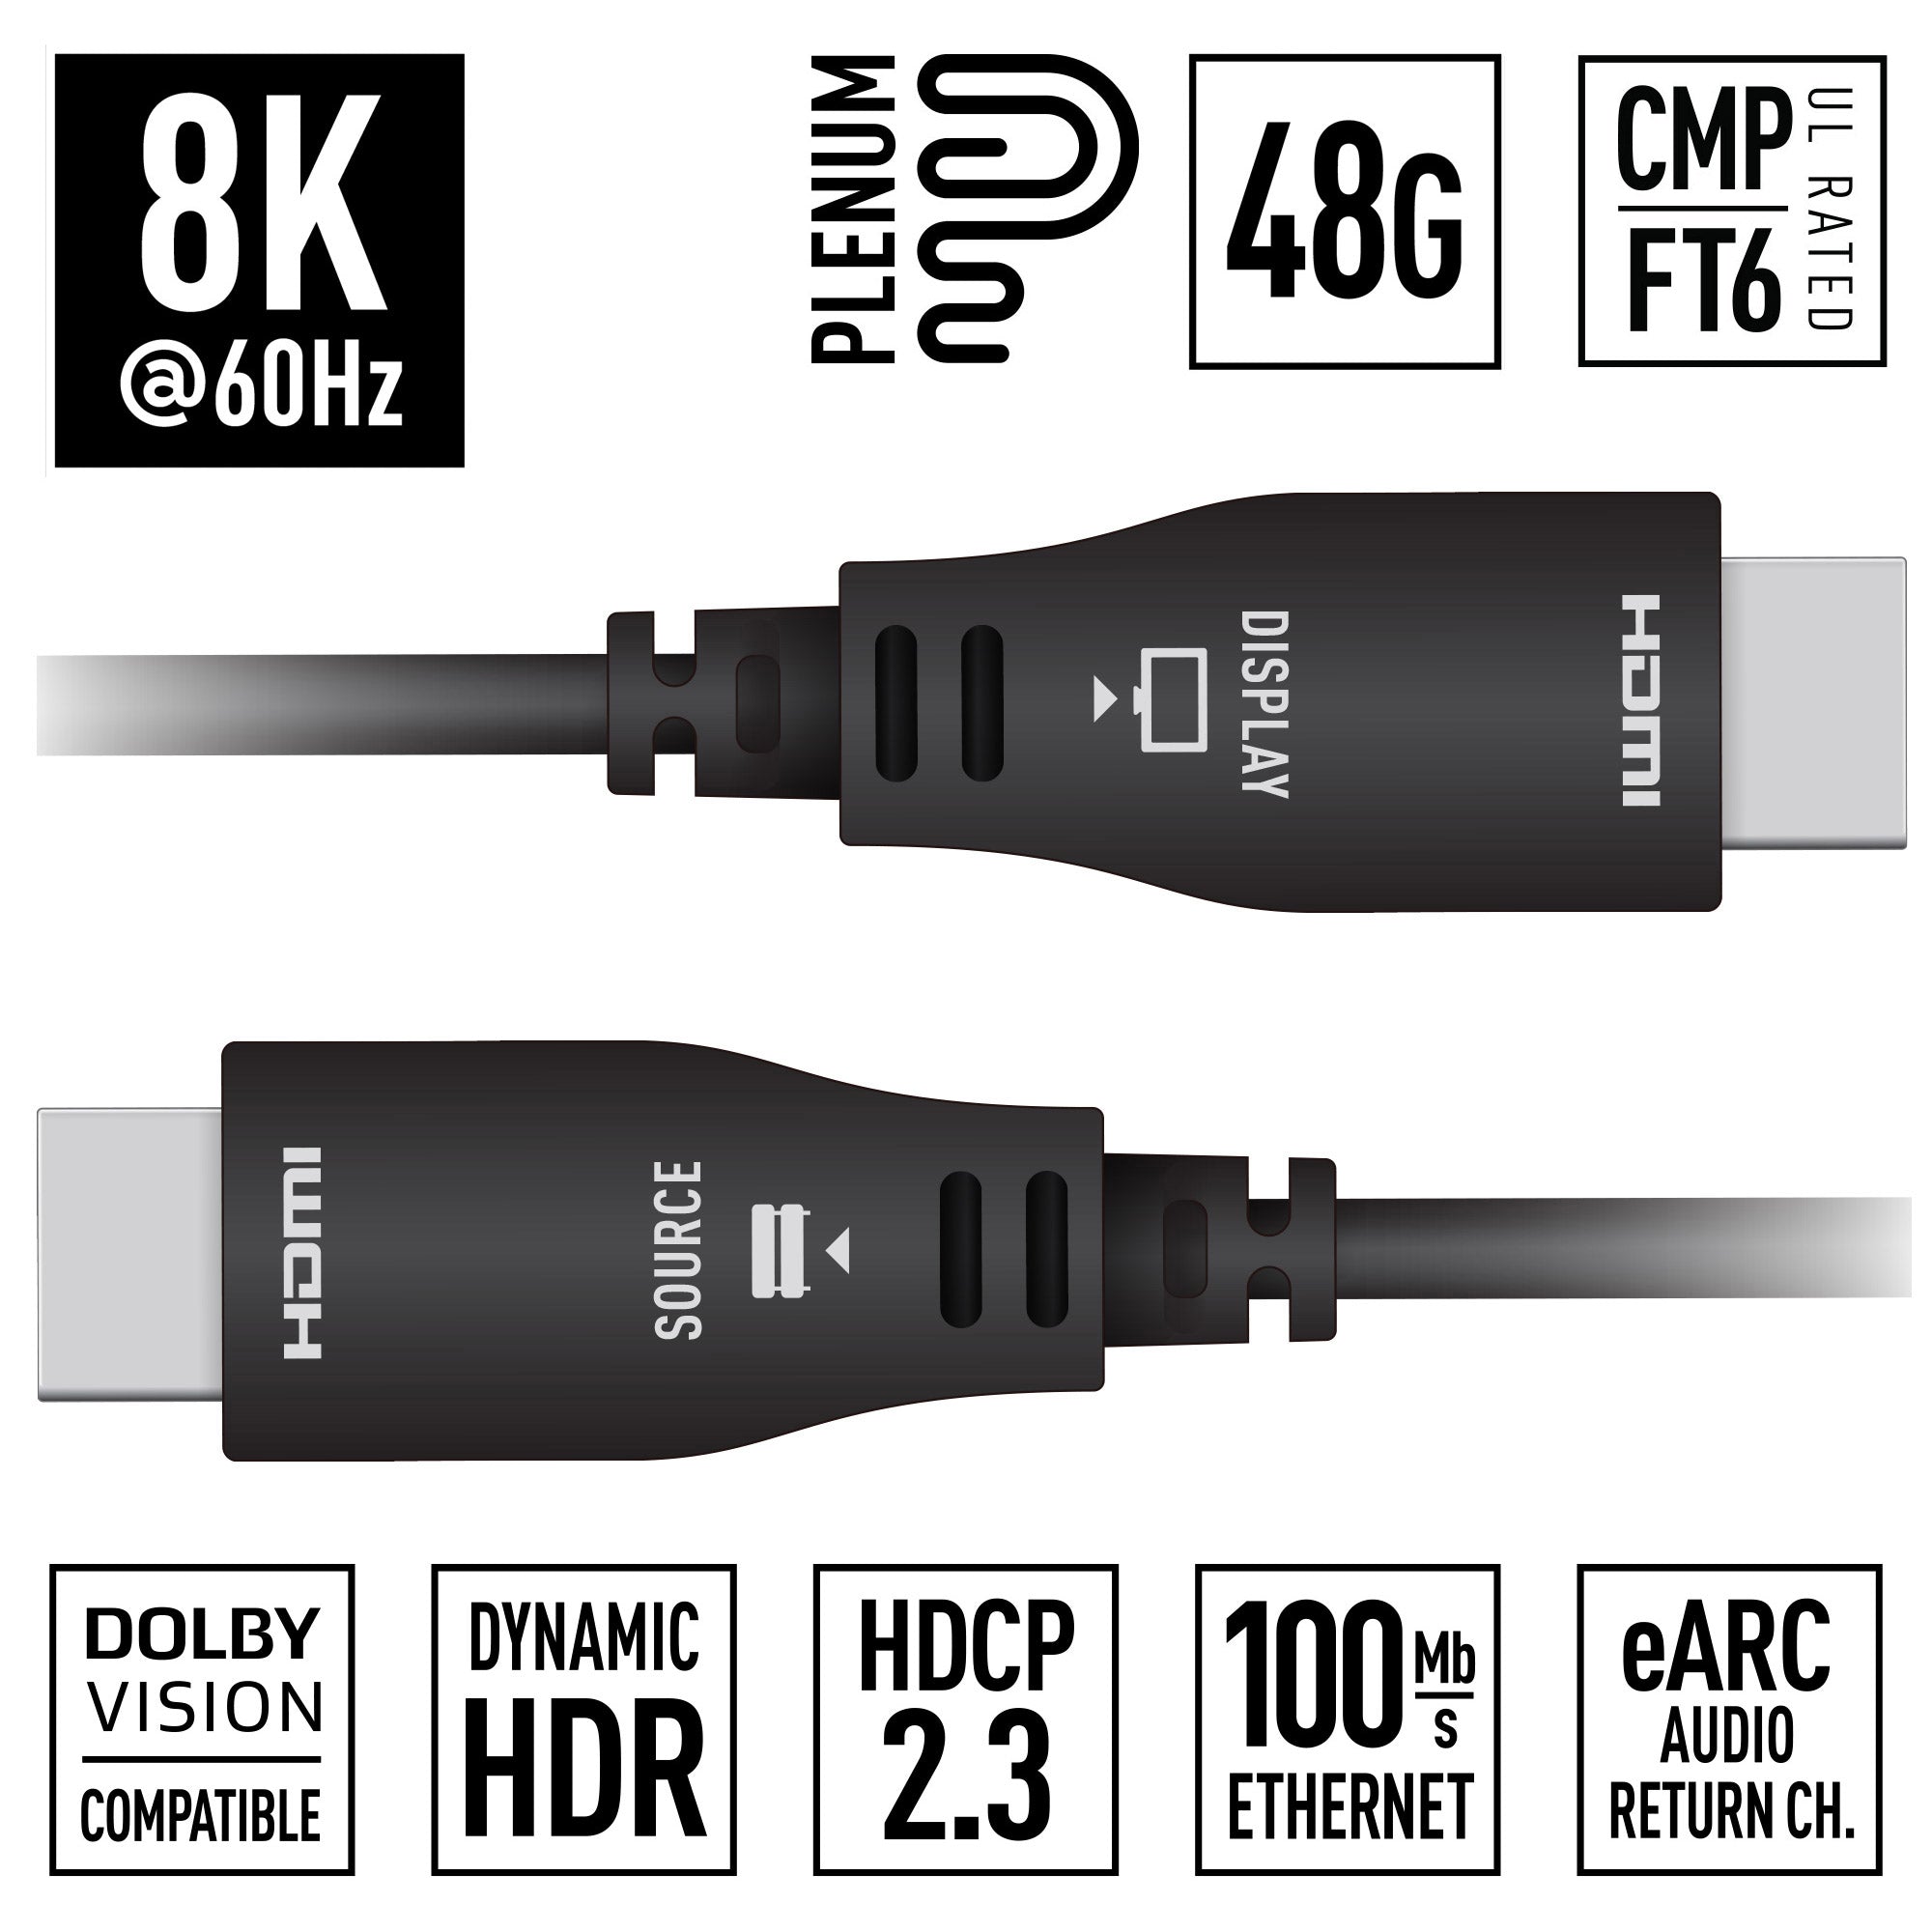 Key Digital 33FT (10M) 8K/48G Plenum Hybrid Fiber Optic Ultra High Speed HDMI Cable. Supports Dynamic HDR, Dolby® Vision, HDCP2.3, eARC, CMP / FT6 UL Rated - KD-AOCH33P